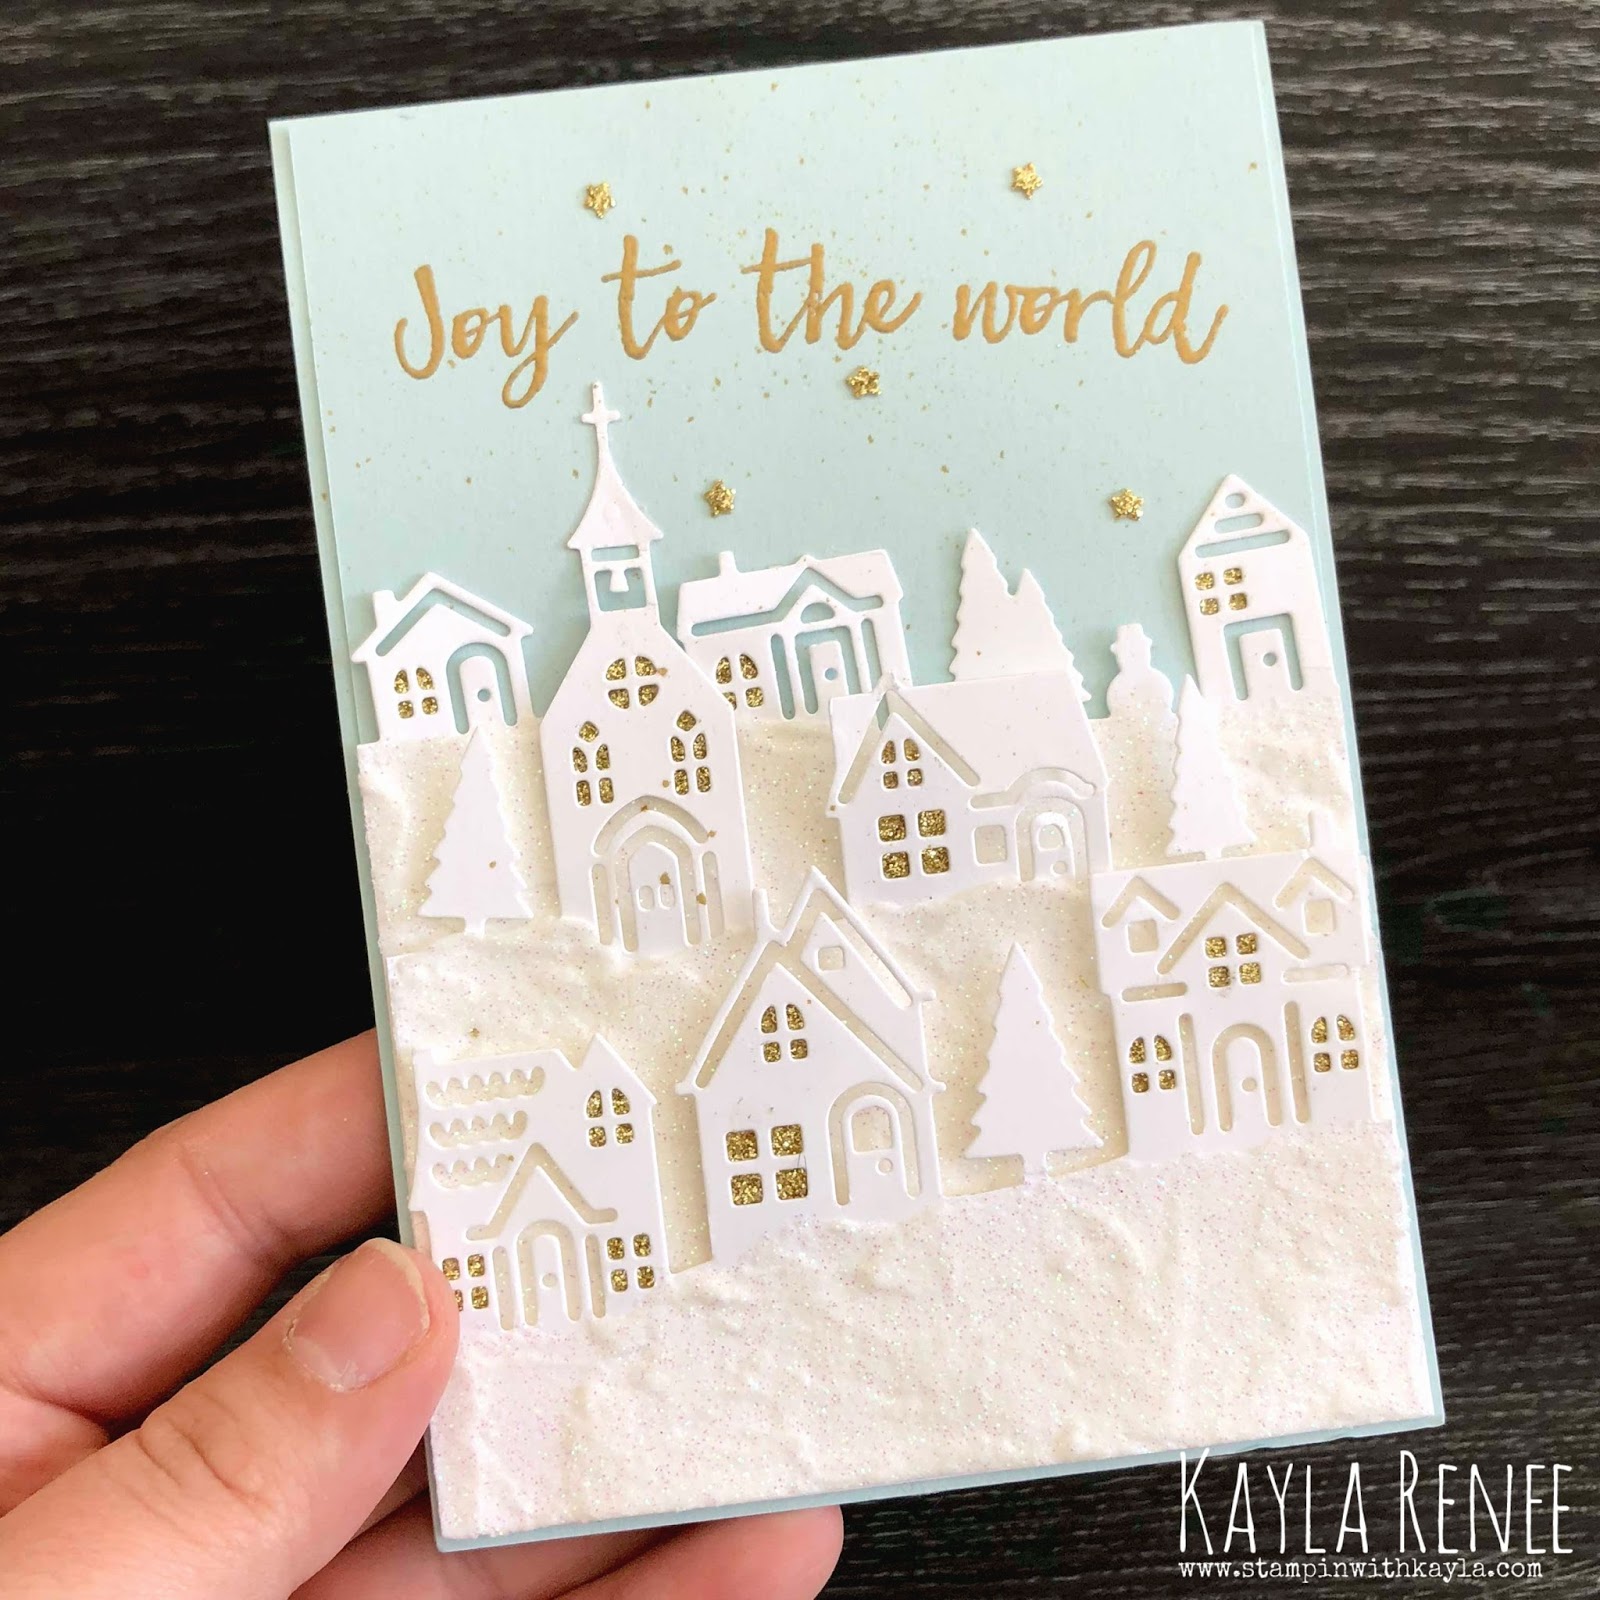 Joy to The World ~ Hearts Come Home